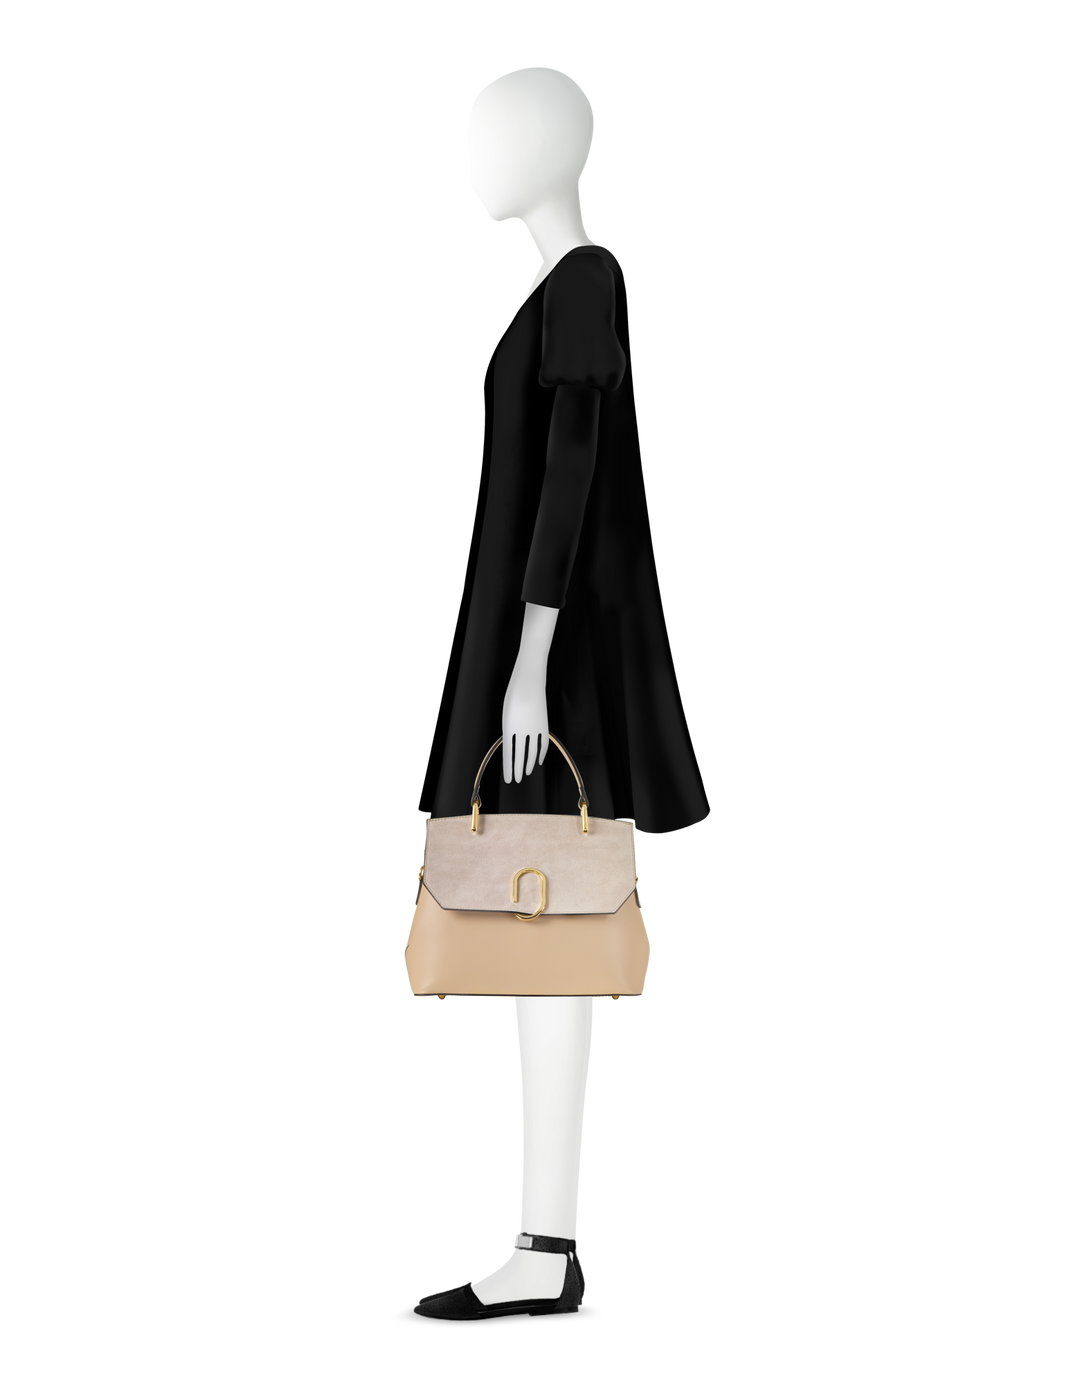 Side view of mannequin holding tan leather handbag while wearing black dress and black shoes